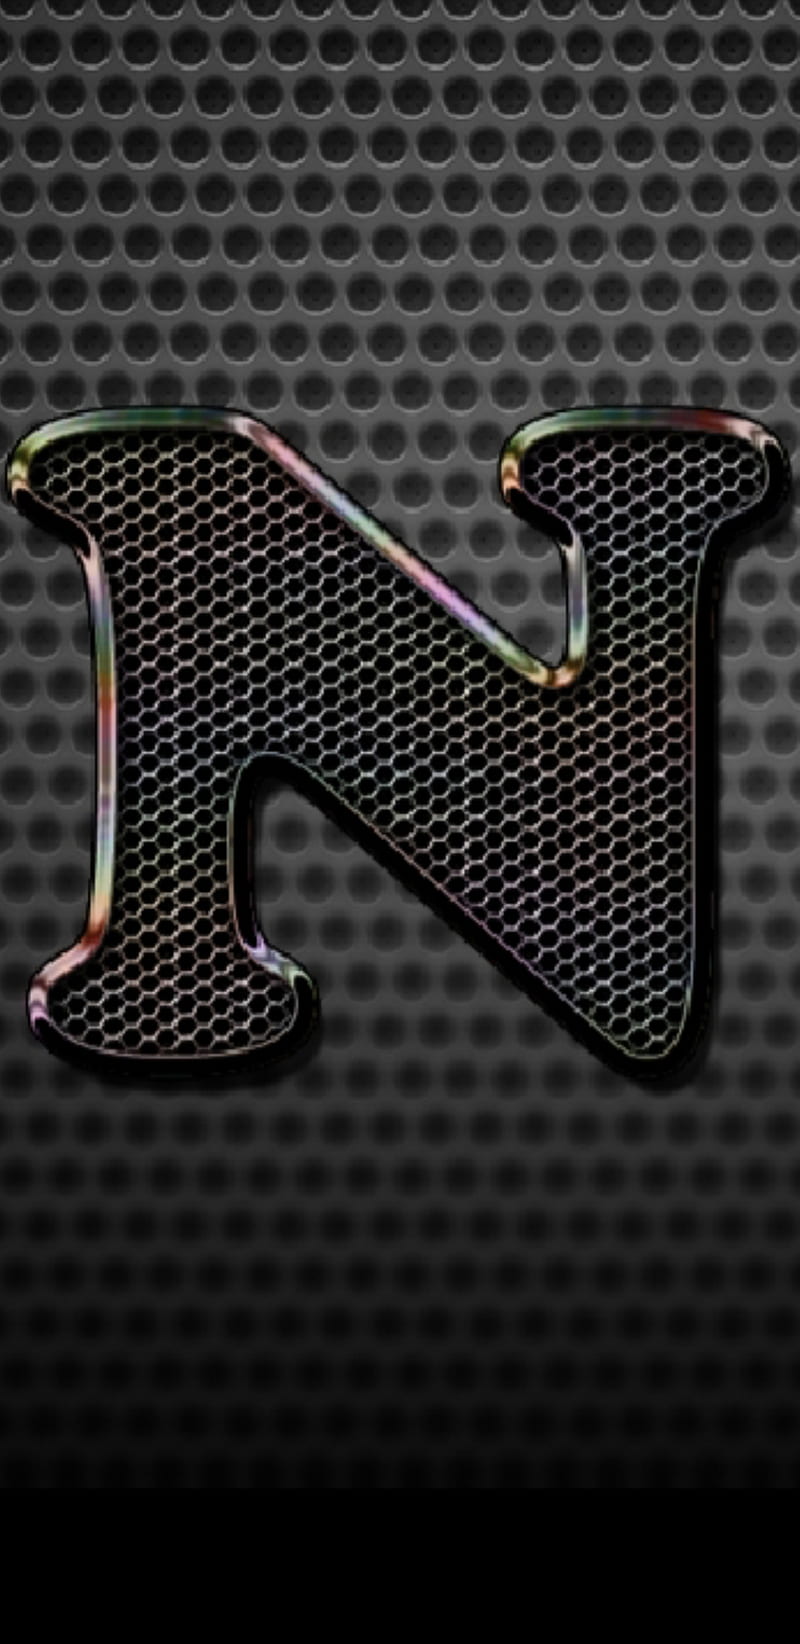 Android n letter hd wallpaper